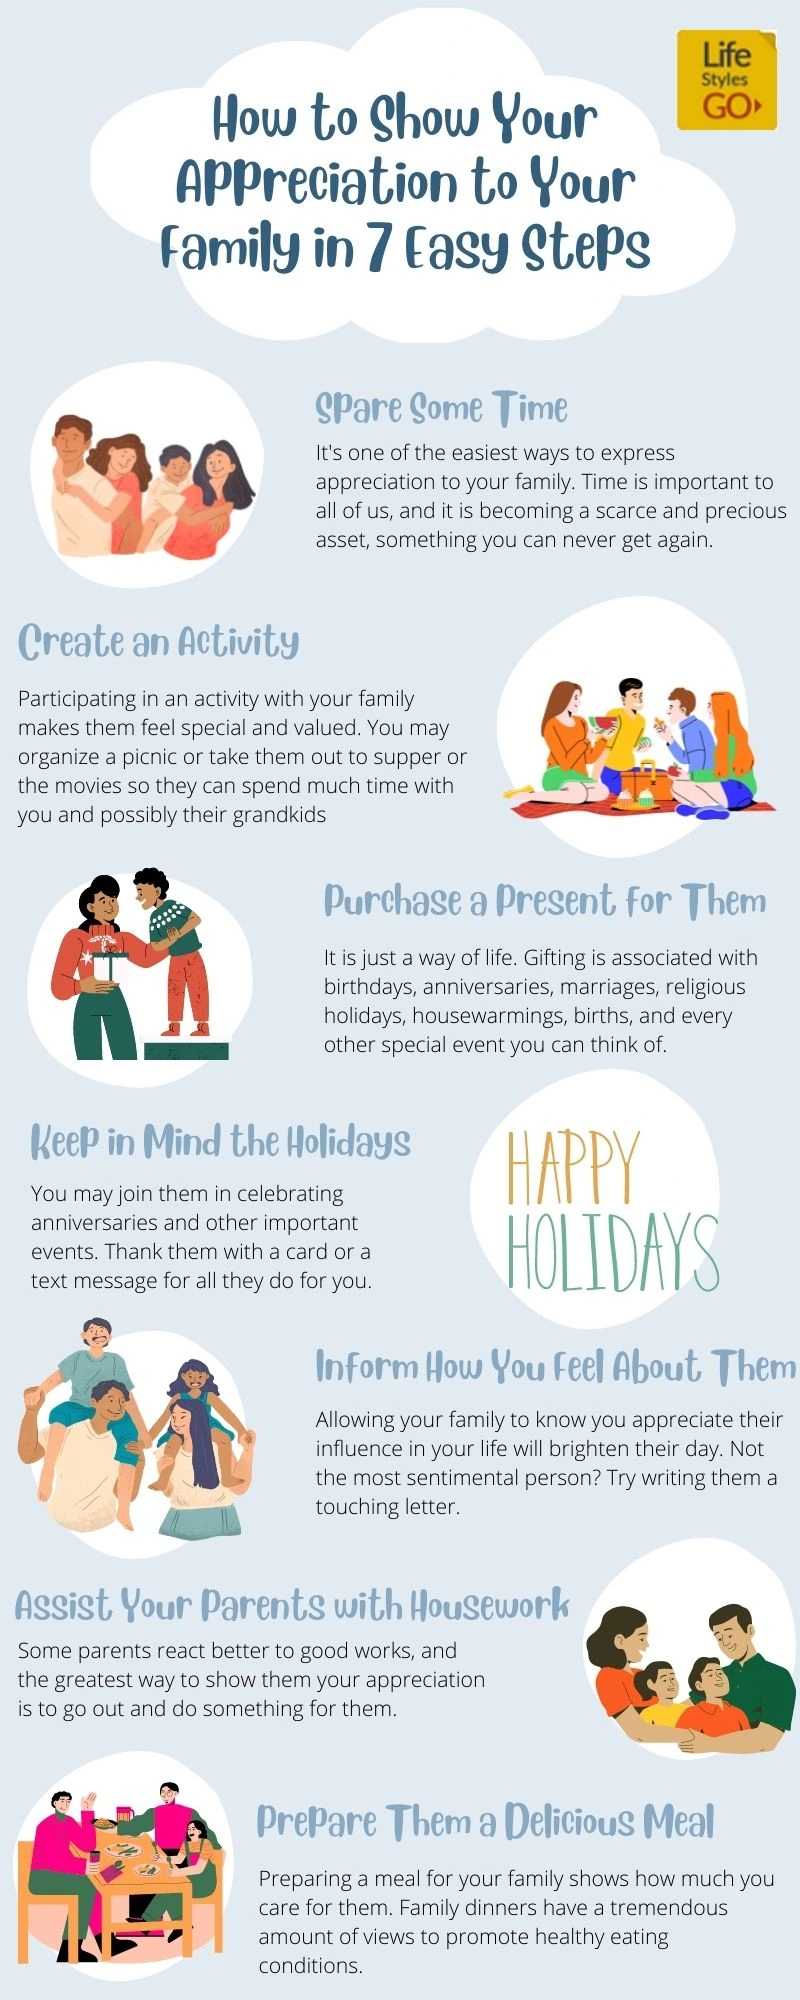 How to Show Your Appreciation to Your Family in 7 Easy Steps Infographic